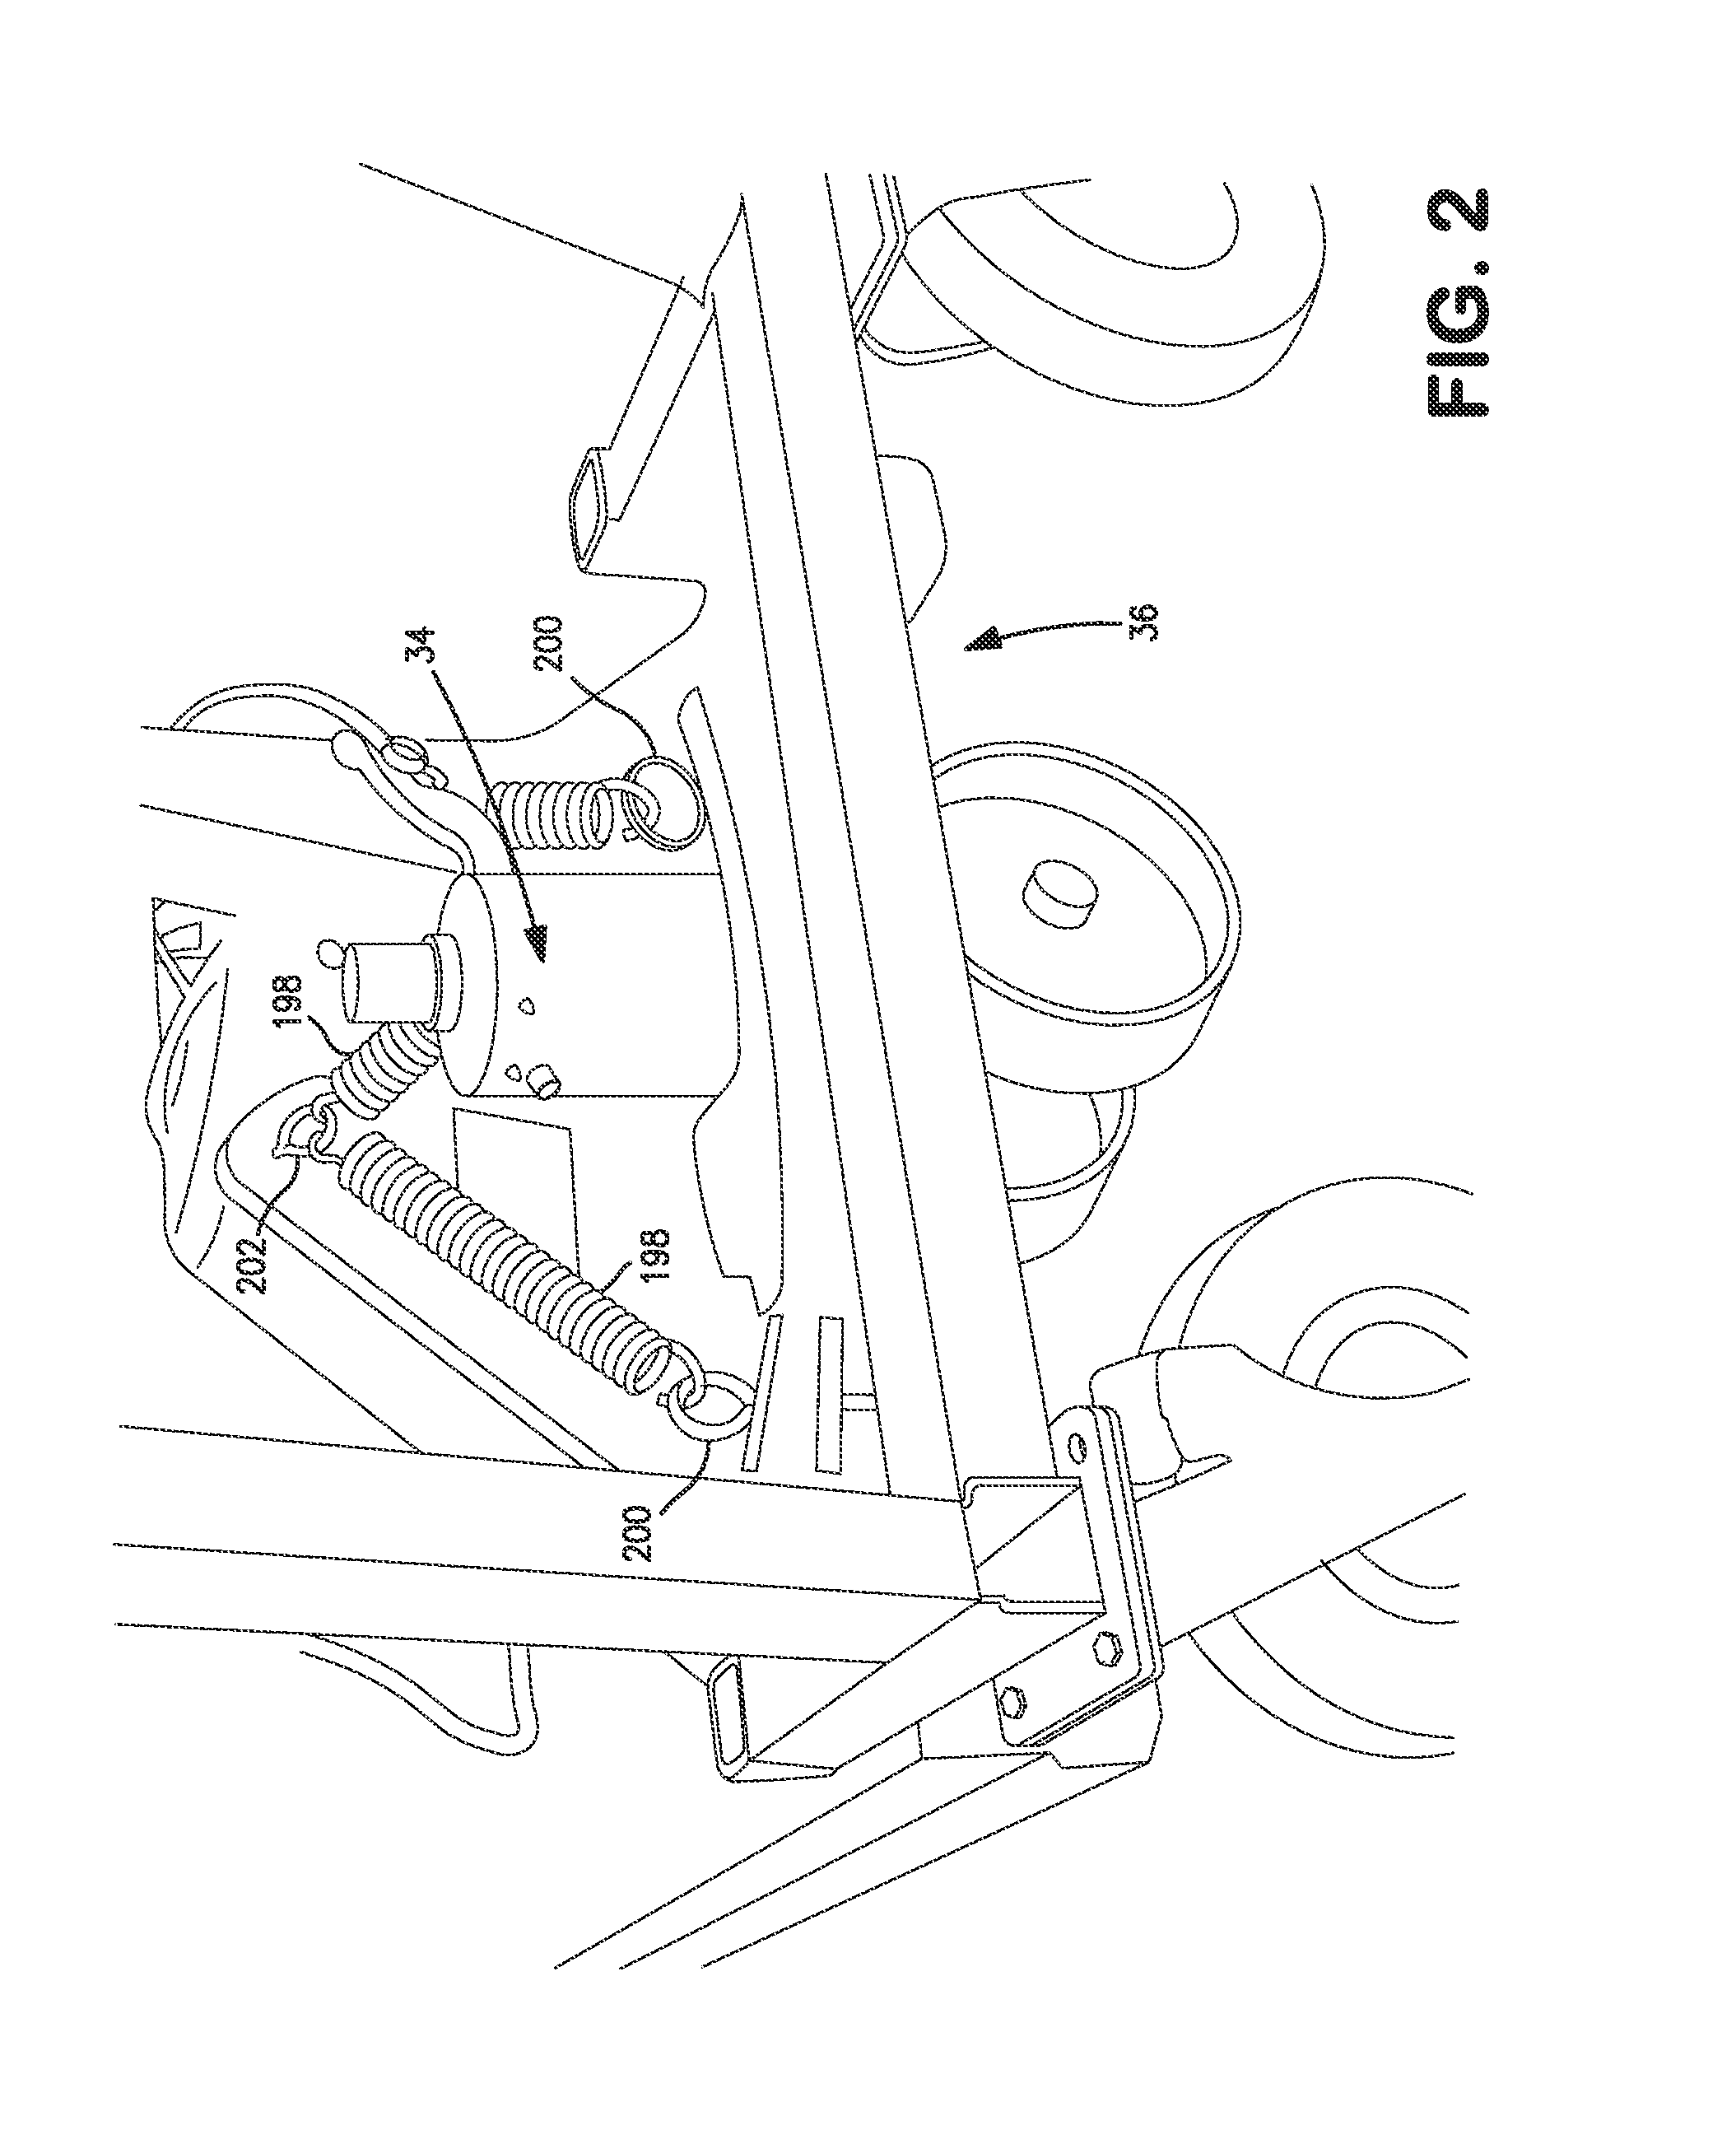 Machine for aligning items in a pattern and a method of use